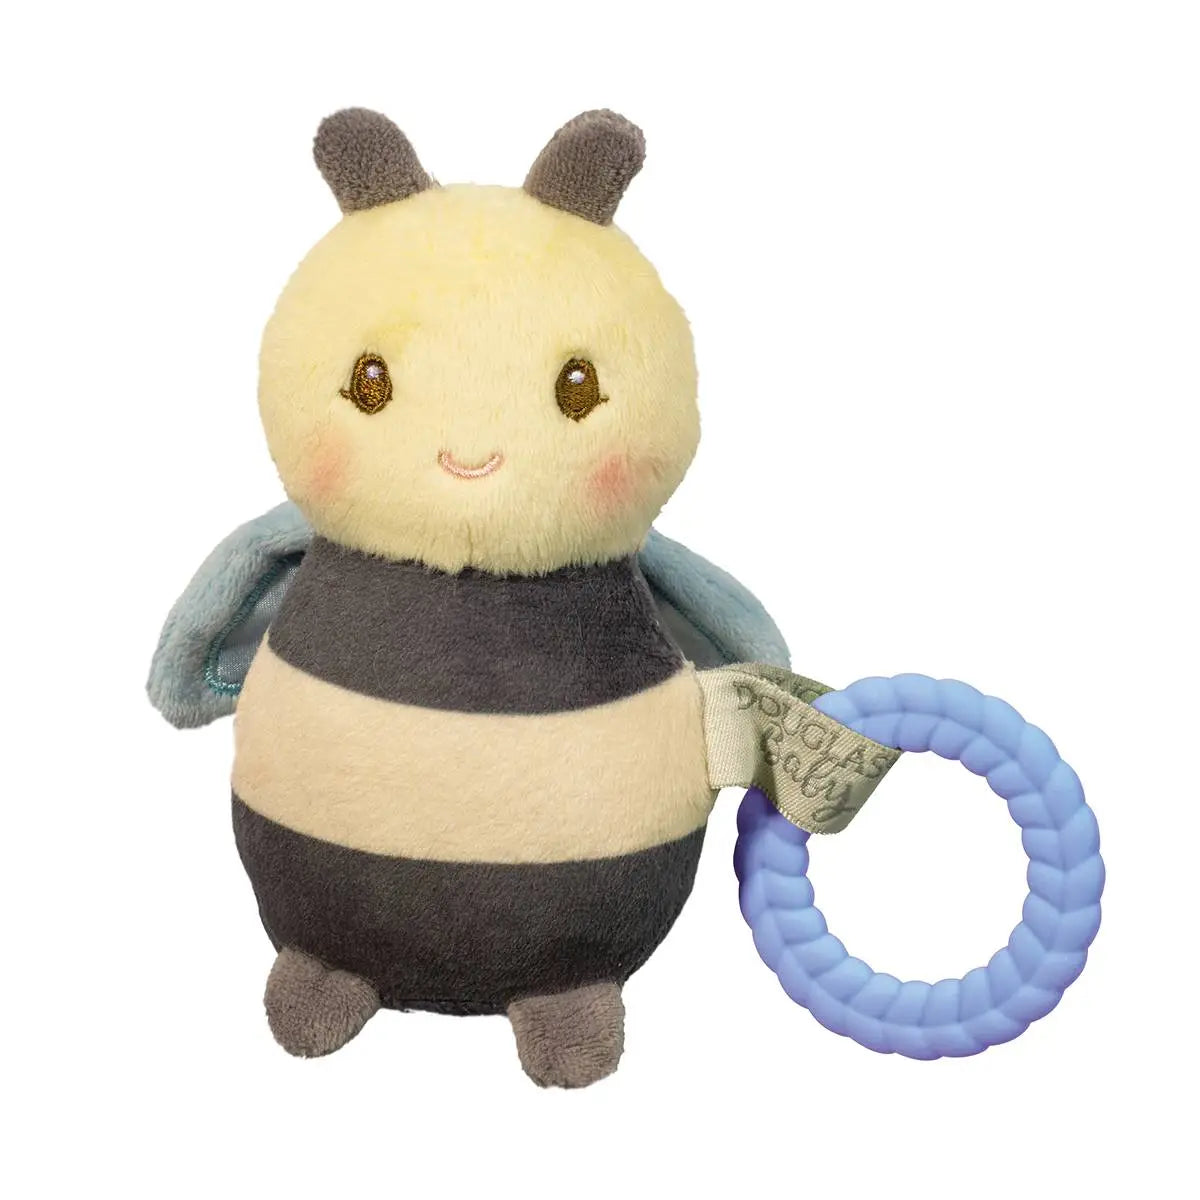 POLLEN BUMBLE BEE PLAYTIVITY RATTLE - Molly's! A Chic and Unique Boutique 